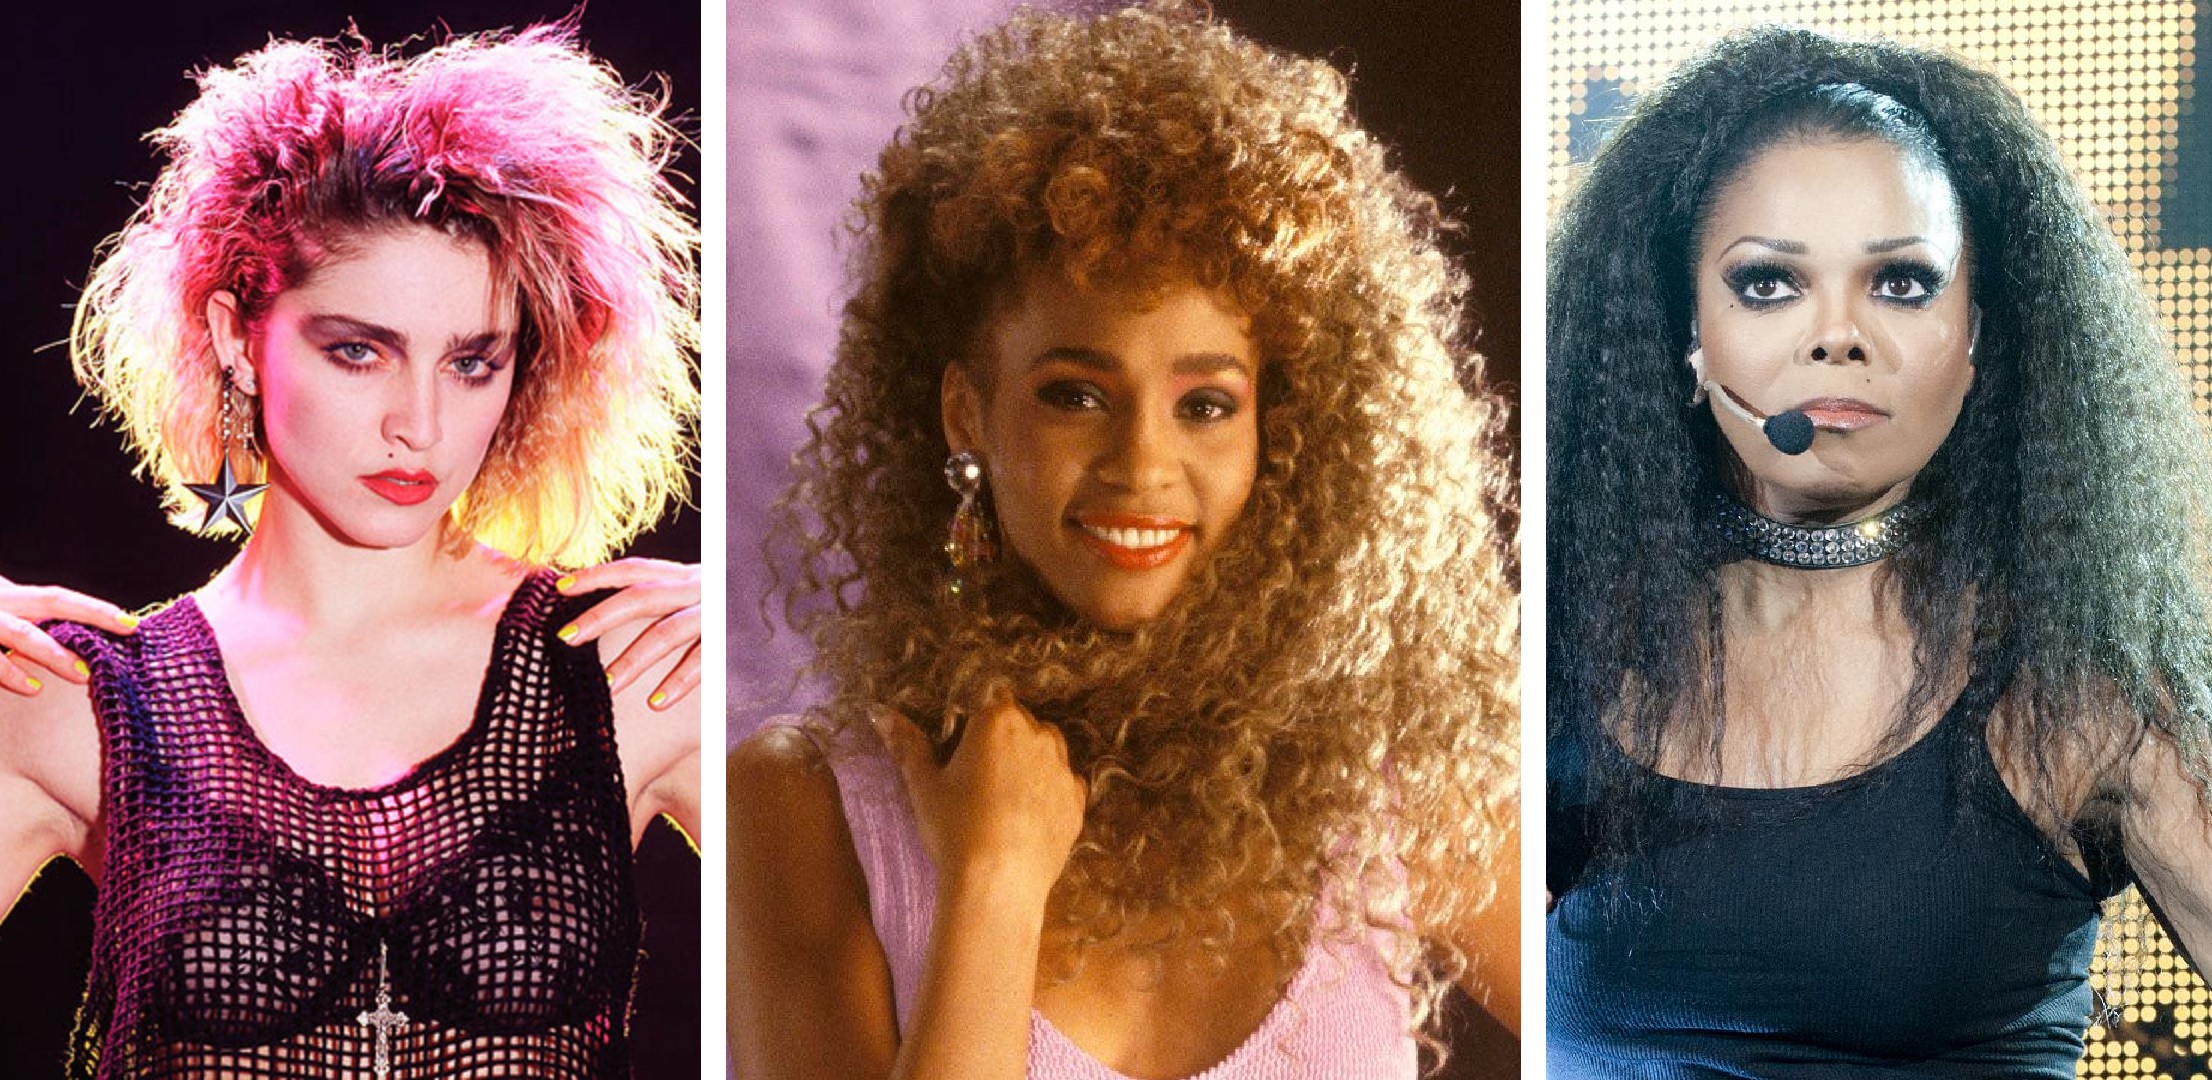 POLL: Whitney, Madonna Or Janet – Who Was The Queen Of 80’s Music? Vote Here!